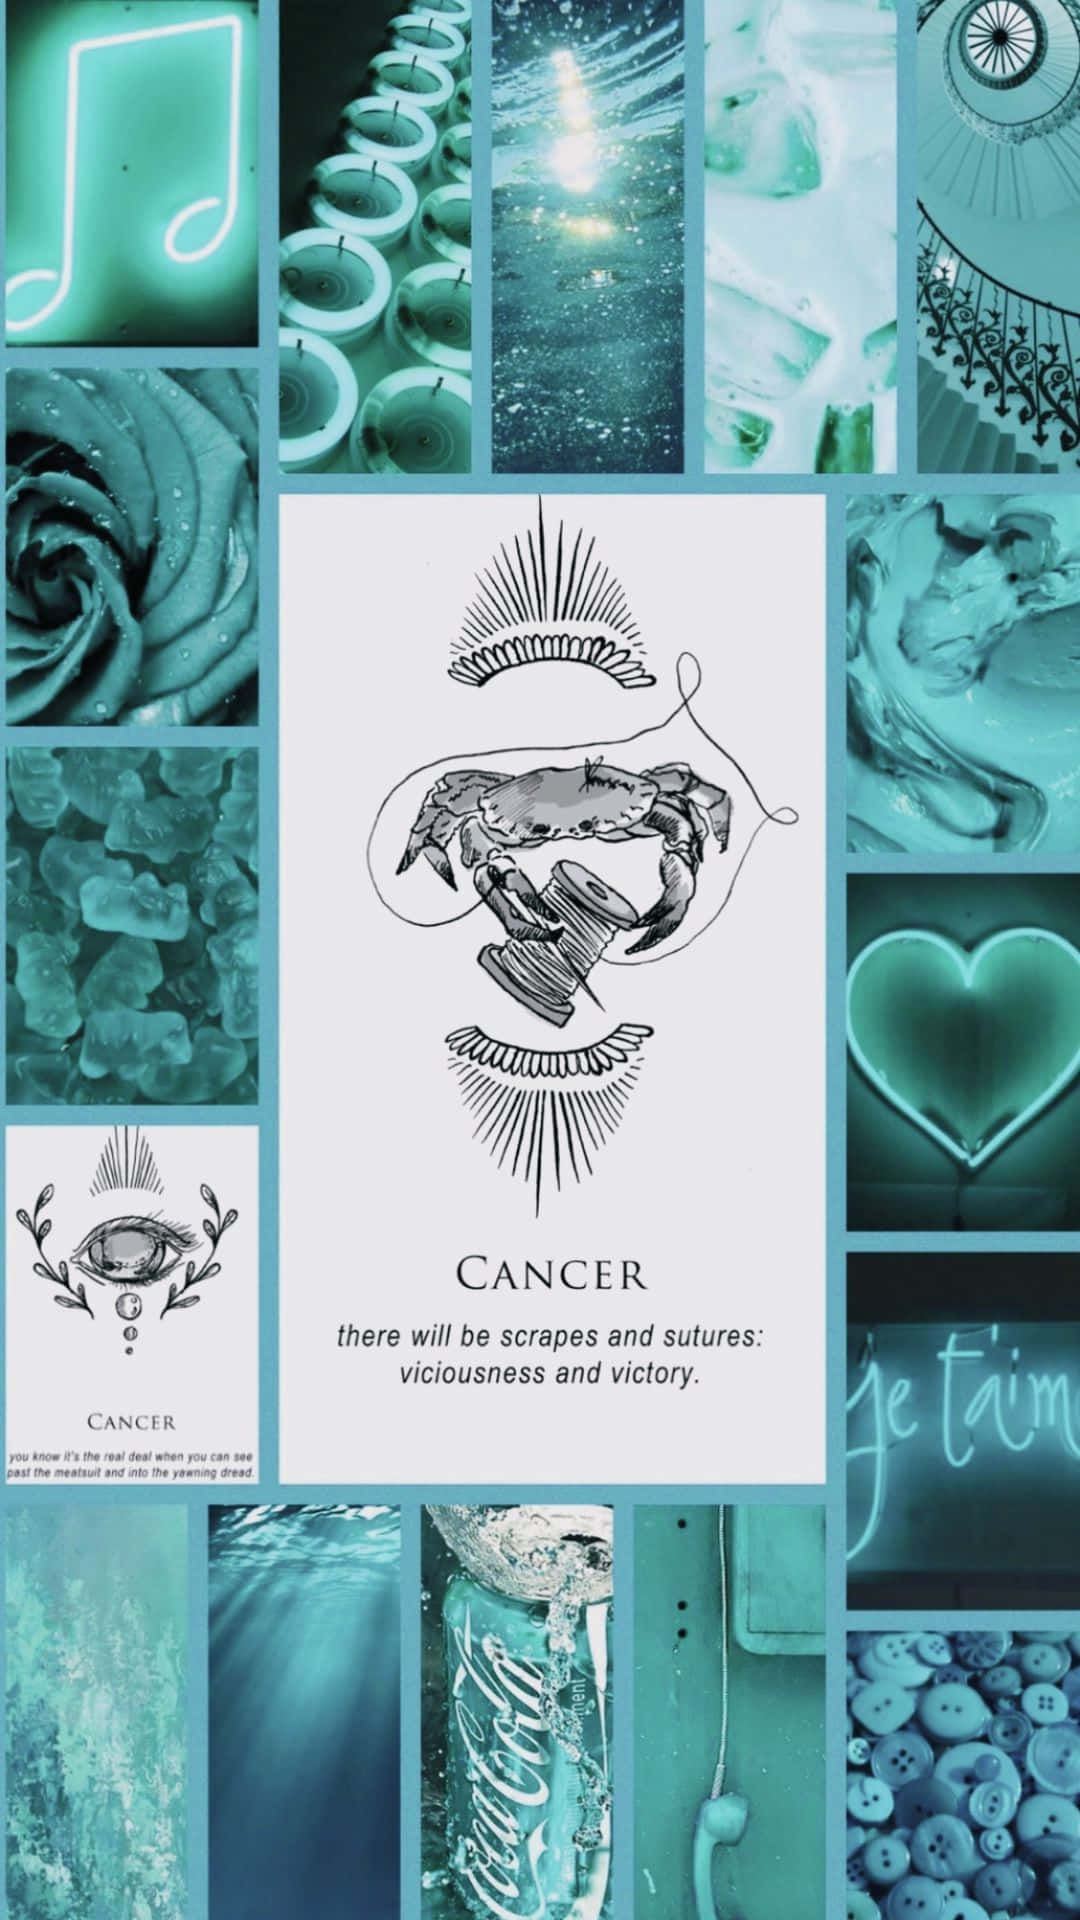 Teal Grid Images With Cute Cancer Zodiac Sign Wallpaper